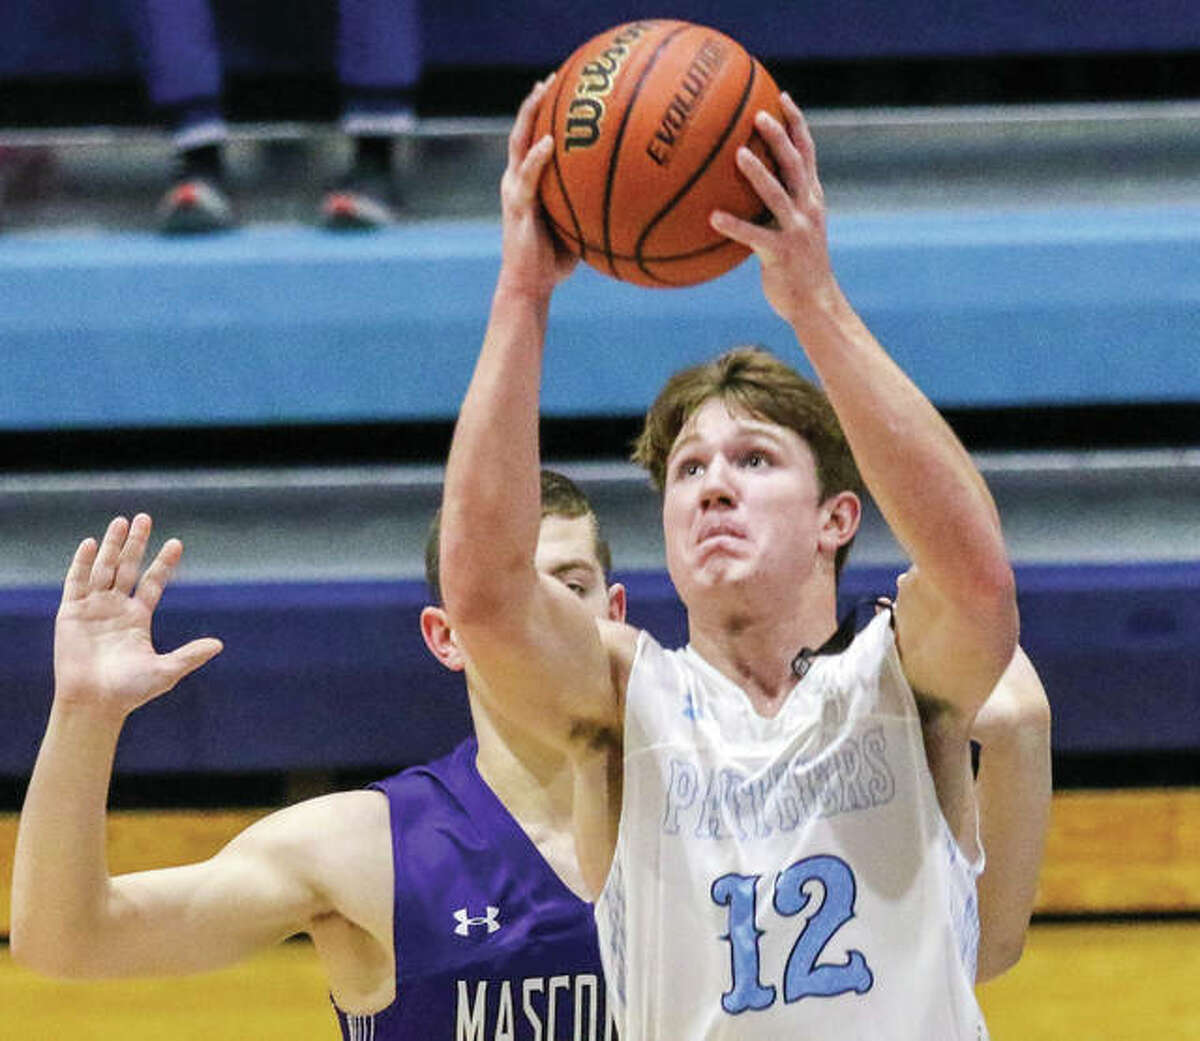 Jersey’s Blake Wittman goes up to score in a Mississippi Valley Conference game against Mascoutah on Tuesday night at Havens Gym in Jerseyville. The Indians defeated the Panthers 64-56 to send Jersey to holiday tournament play next week in Pinckneyville.